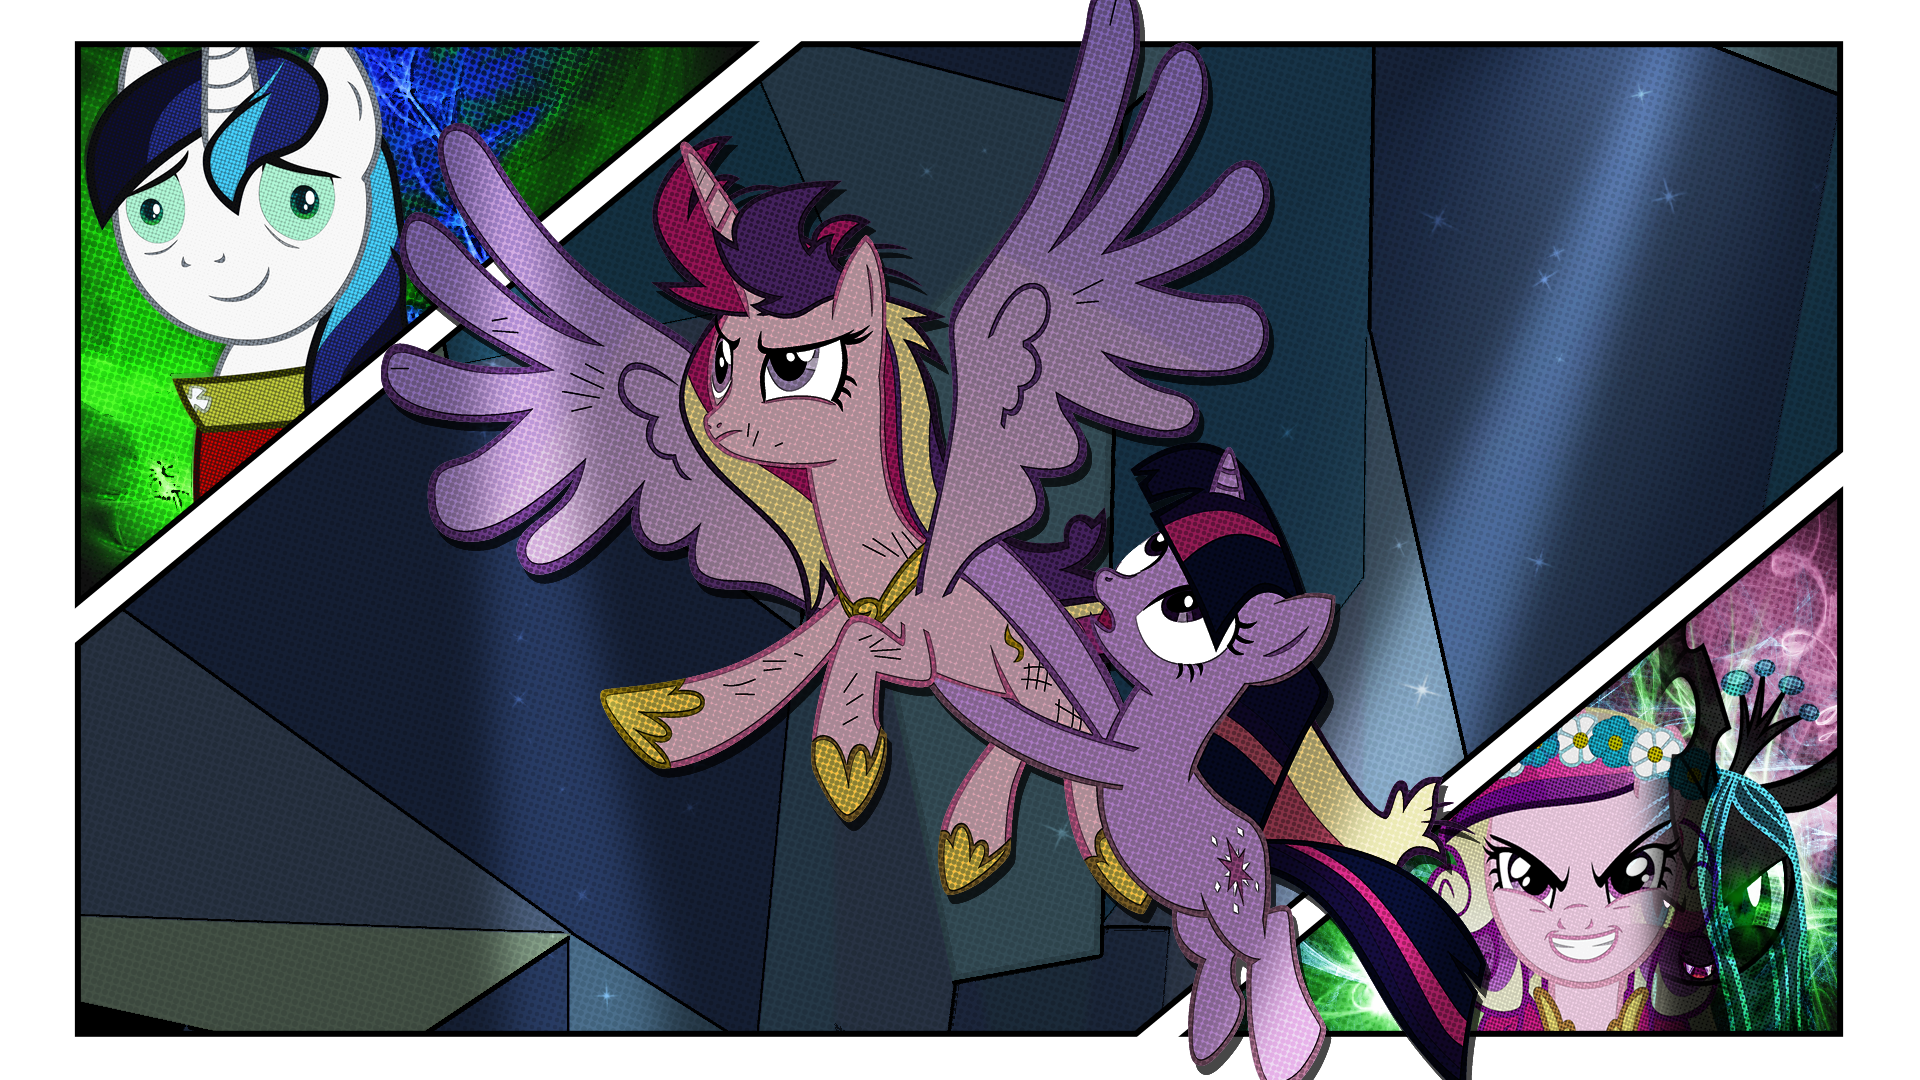 FiM: Race Against Time by Archonitianicsmasher, Bronyboy, M24Designs and The-Smiling-Pony